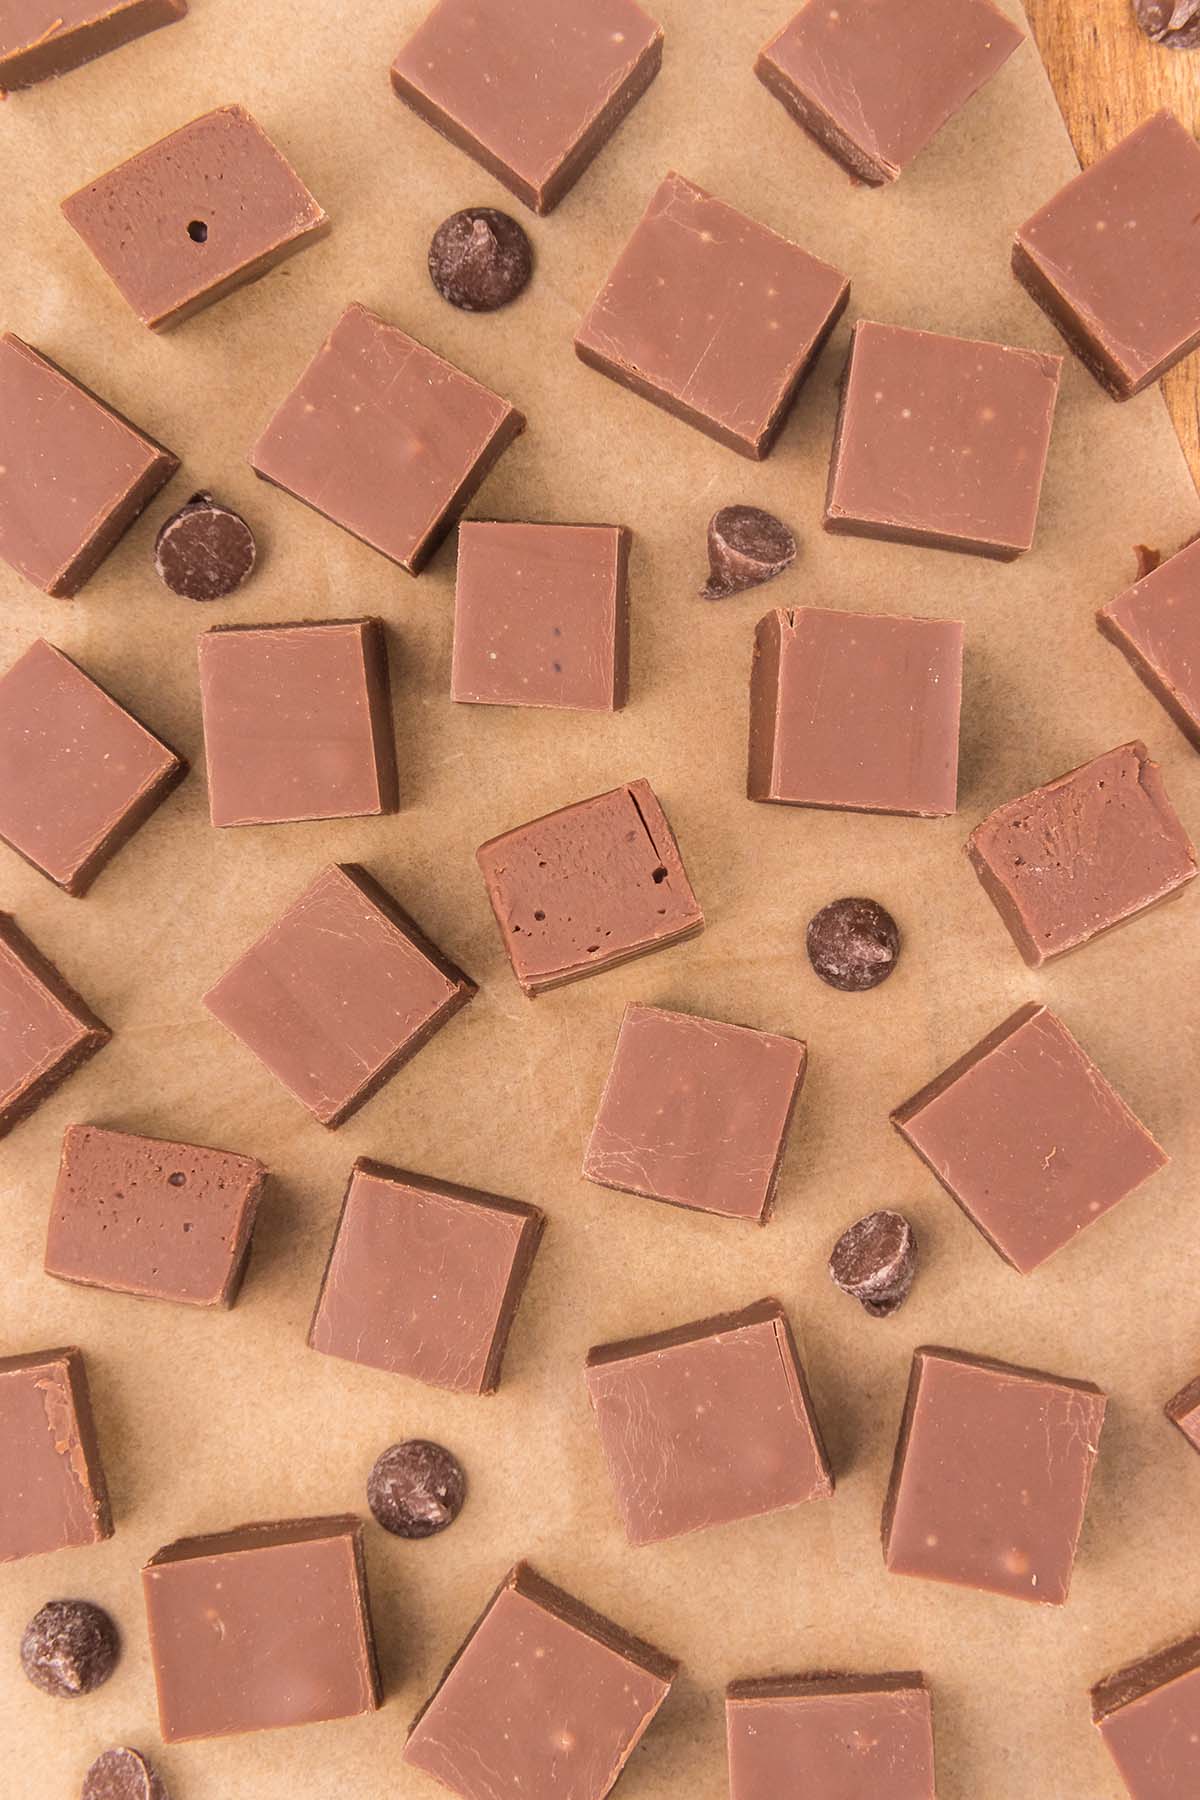 Kahlua Fudge scattered on the table with chocolate chips.